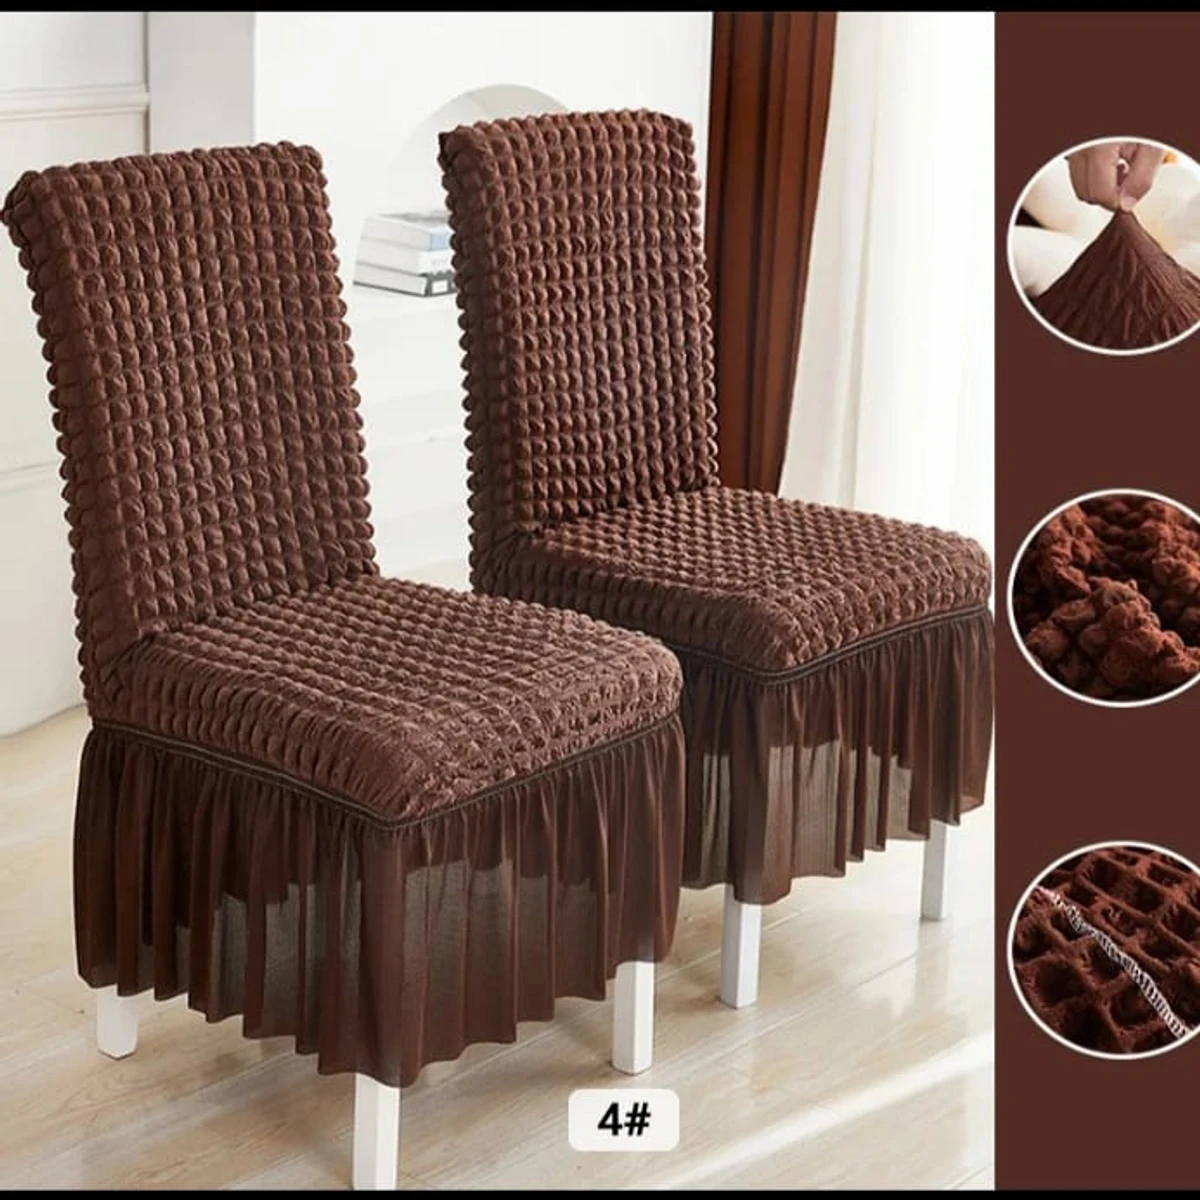 Chair Covers for Dining Room Seat (coffee colour)